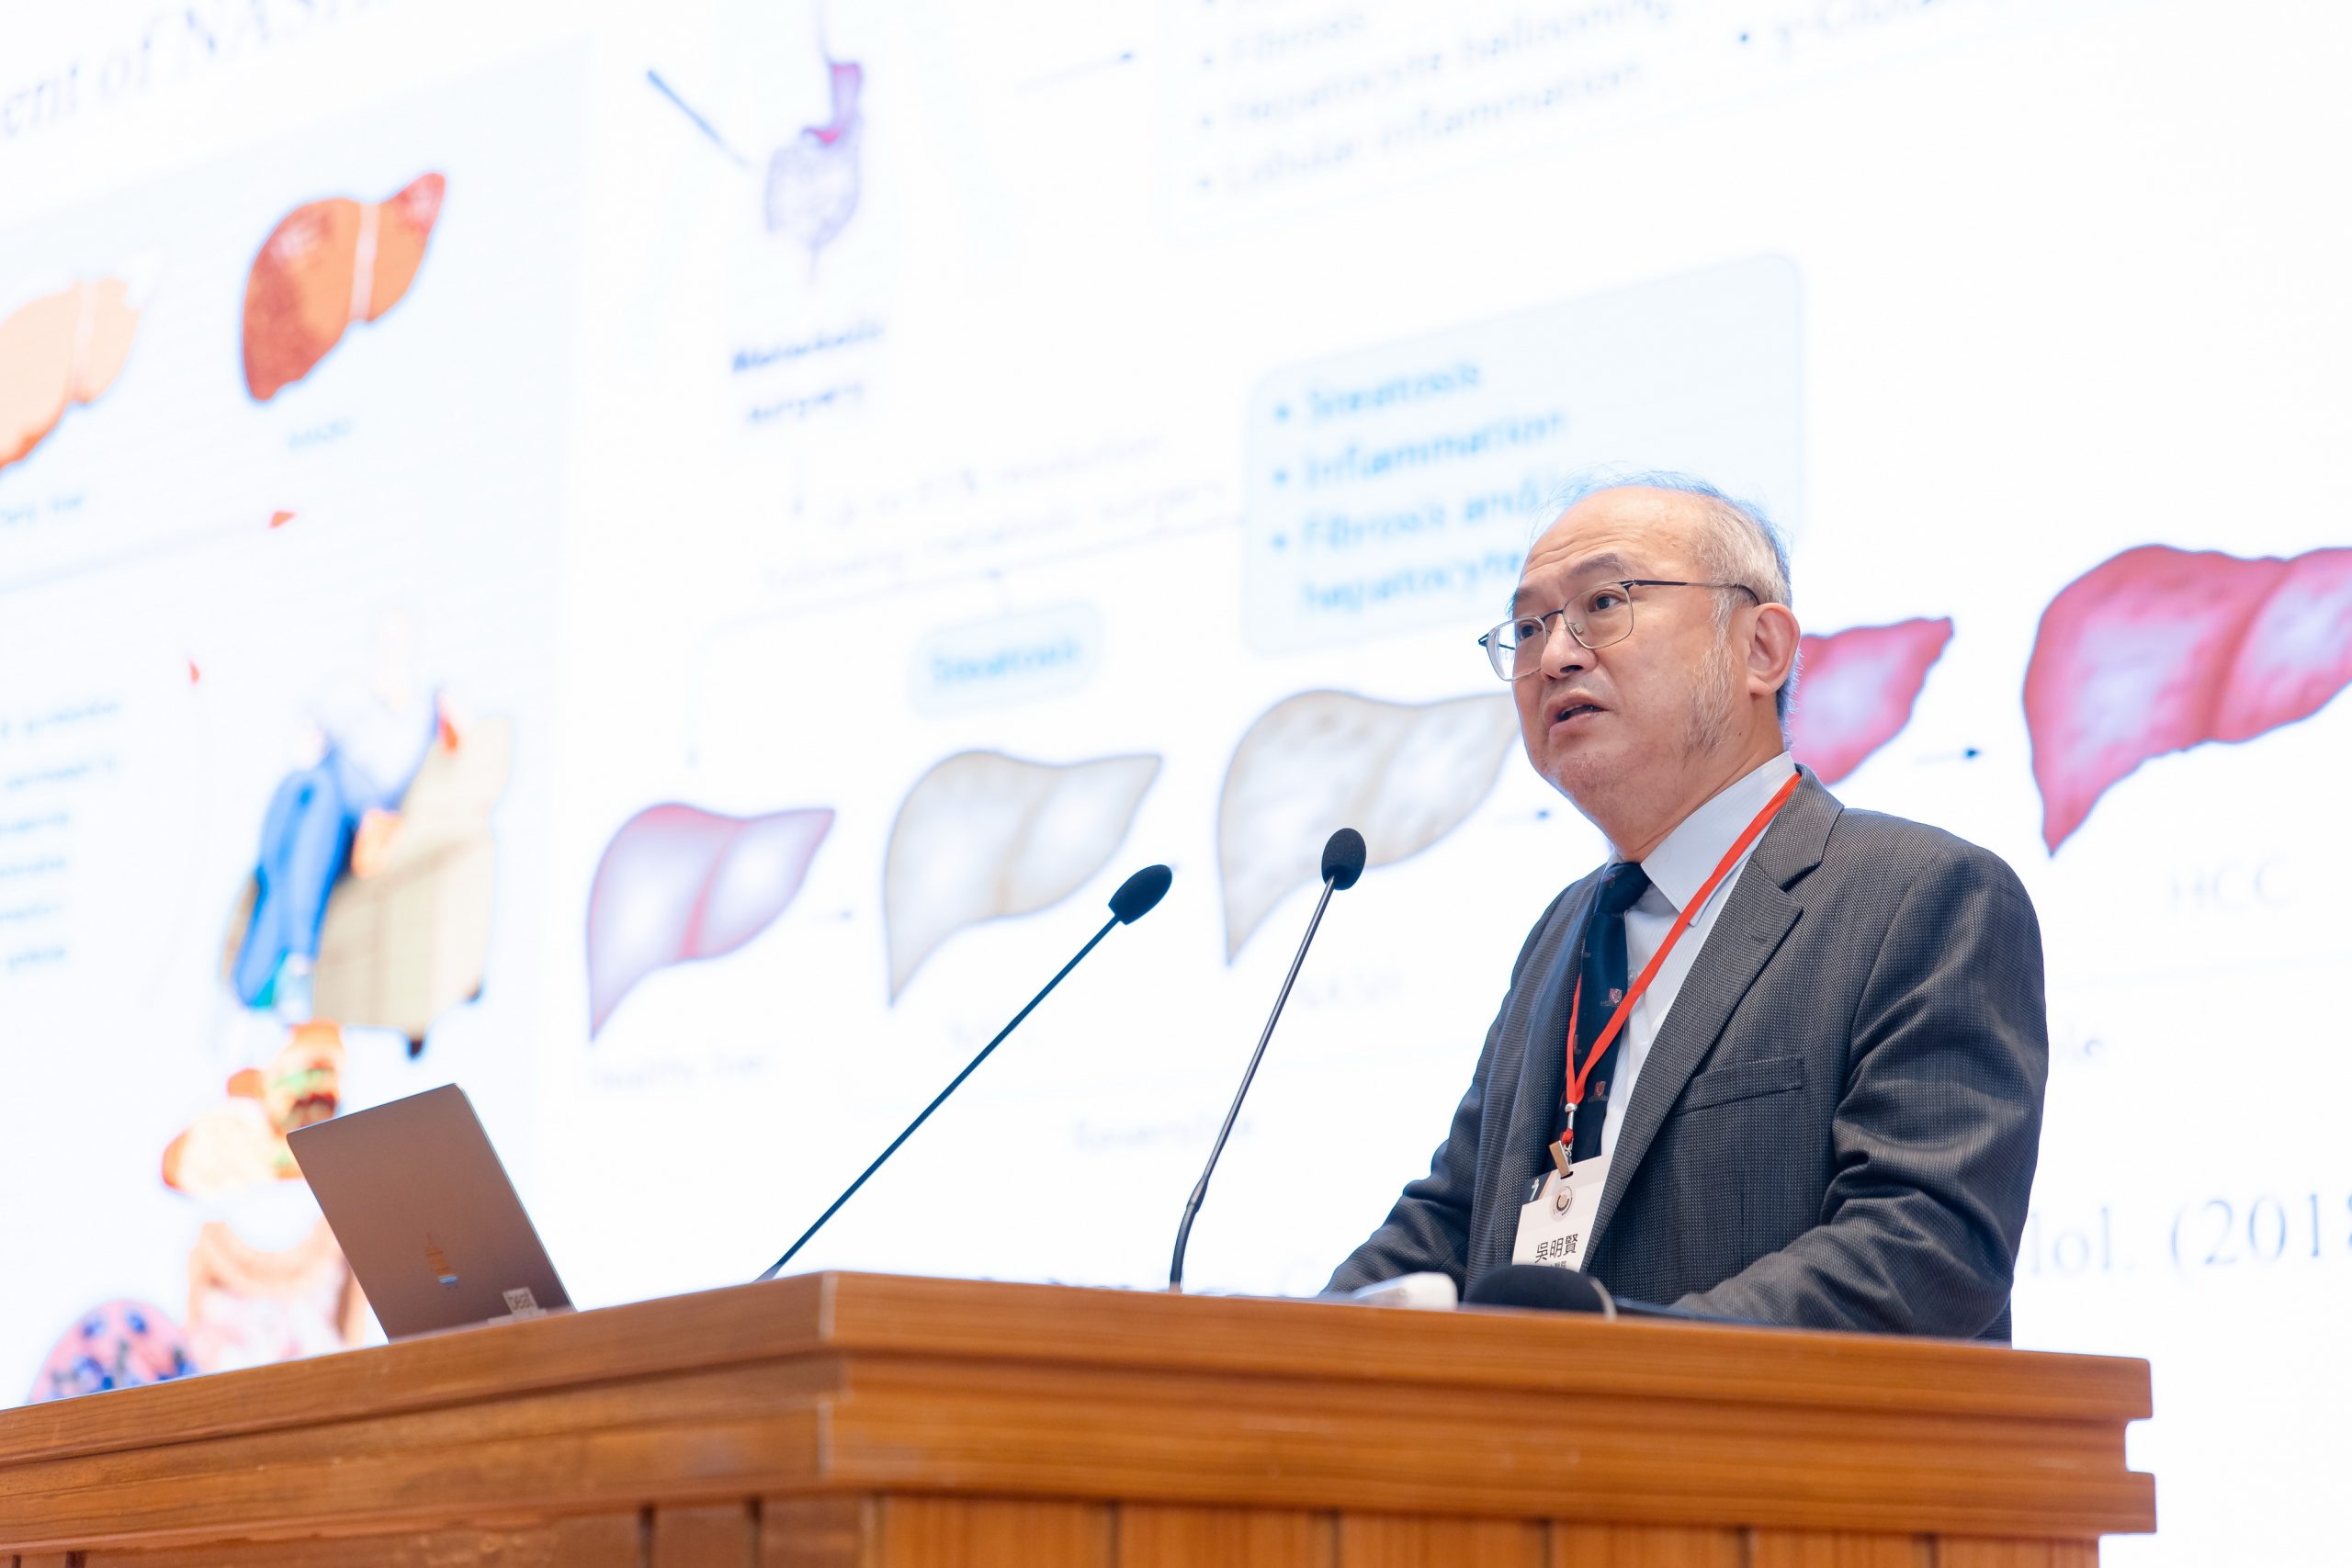 Dr. Ming-Shiang Wu, the dean of the National Taiwan University Hospital